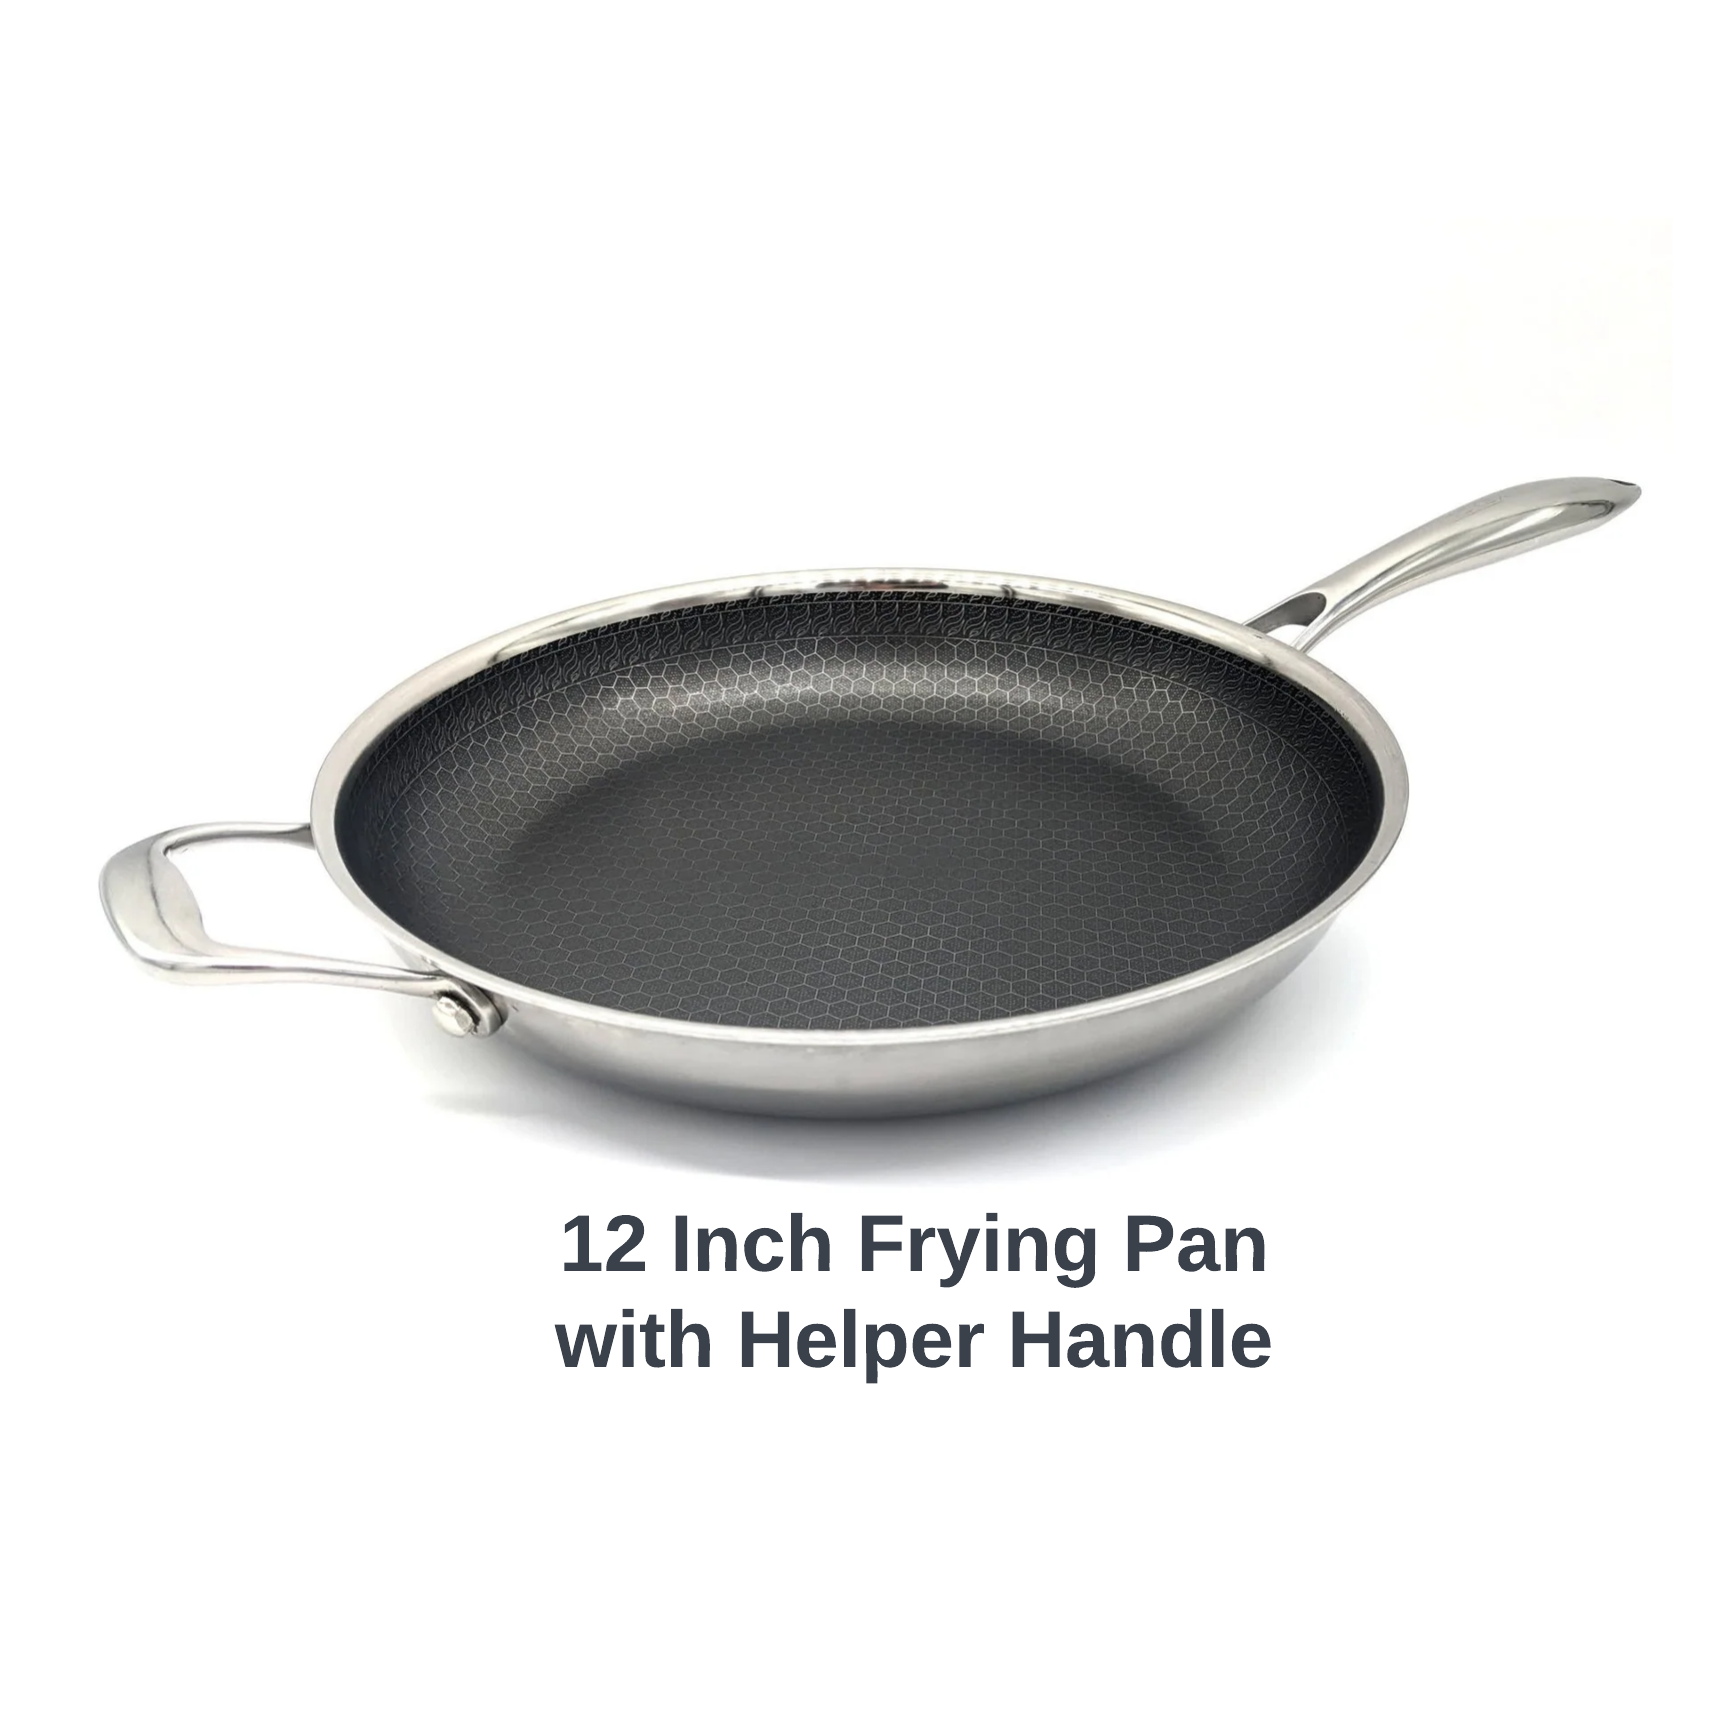 Hexclad 12 Skillet, Frying Pan, Fryer, Stainless Steel With Hexagon  Nonstick Surface, Tri-ply Construction, USED 